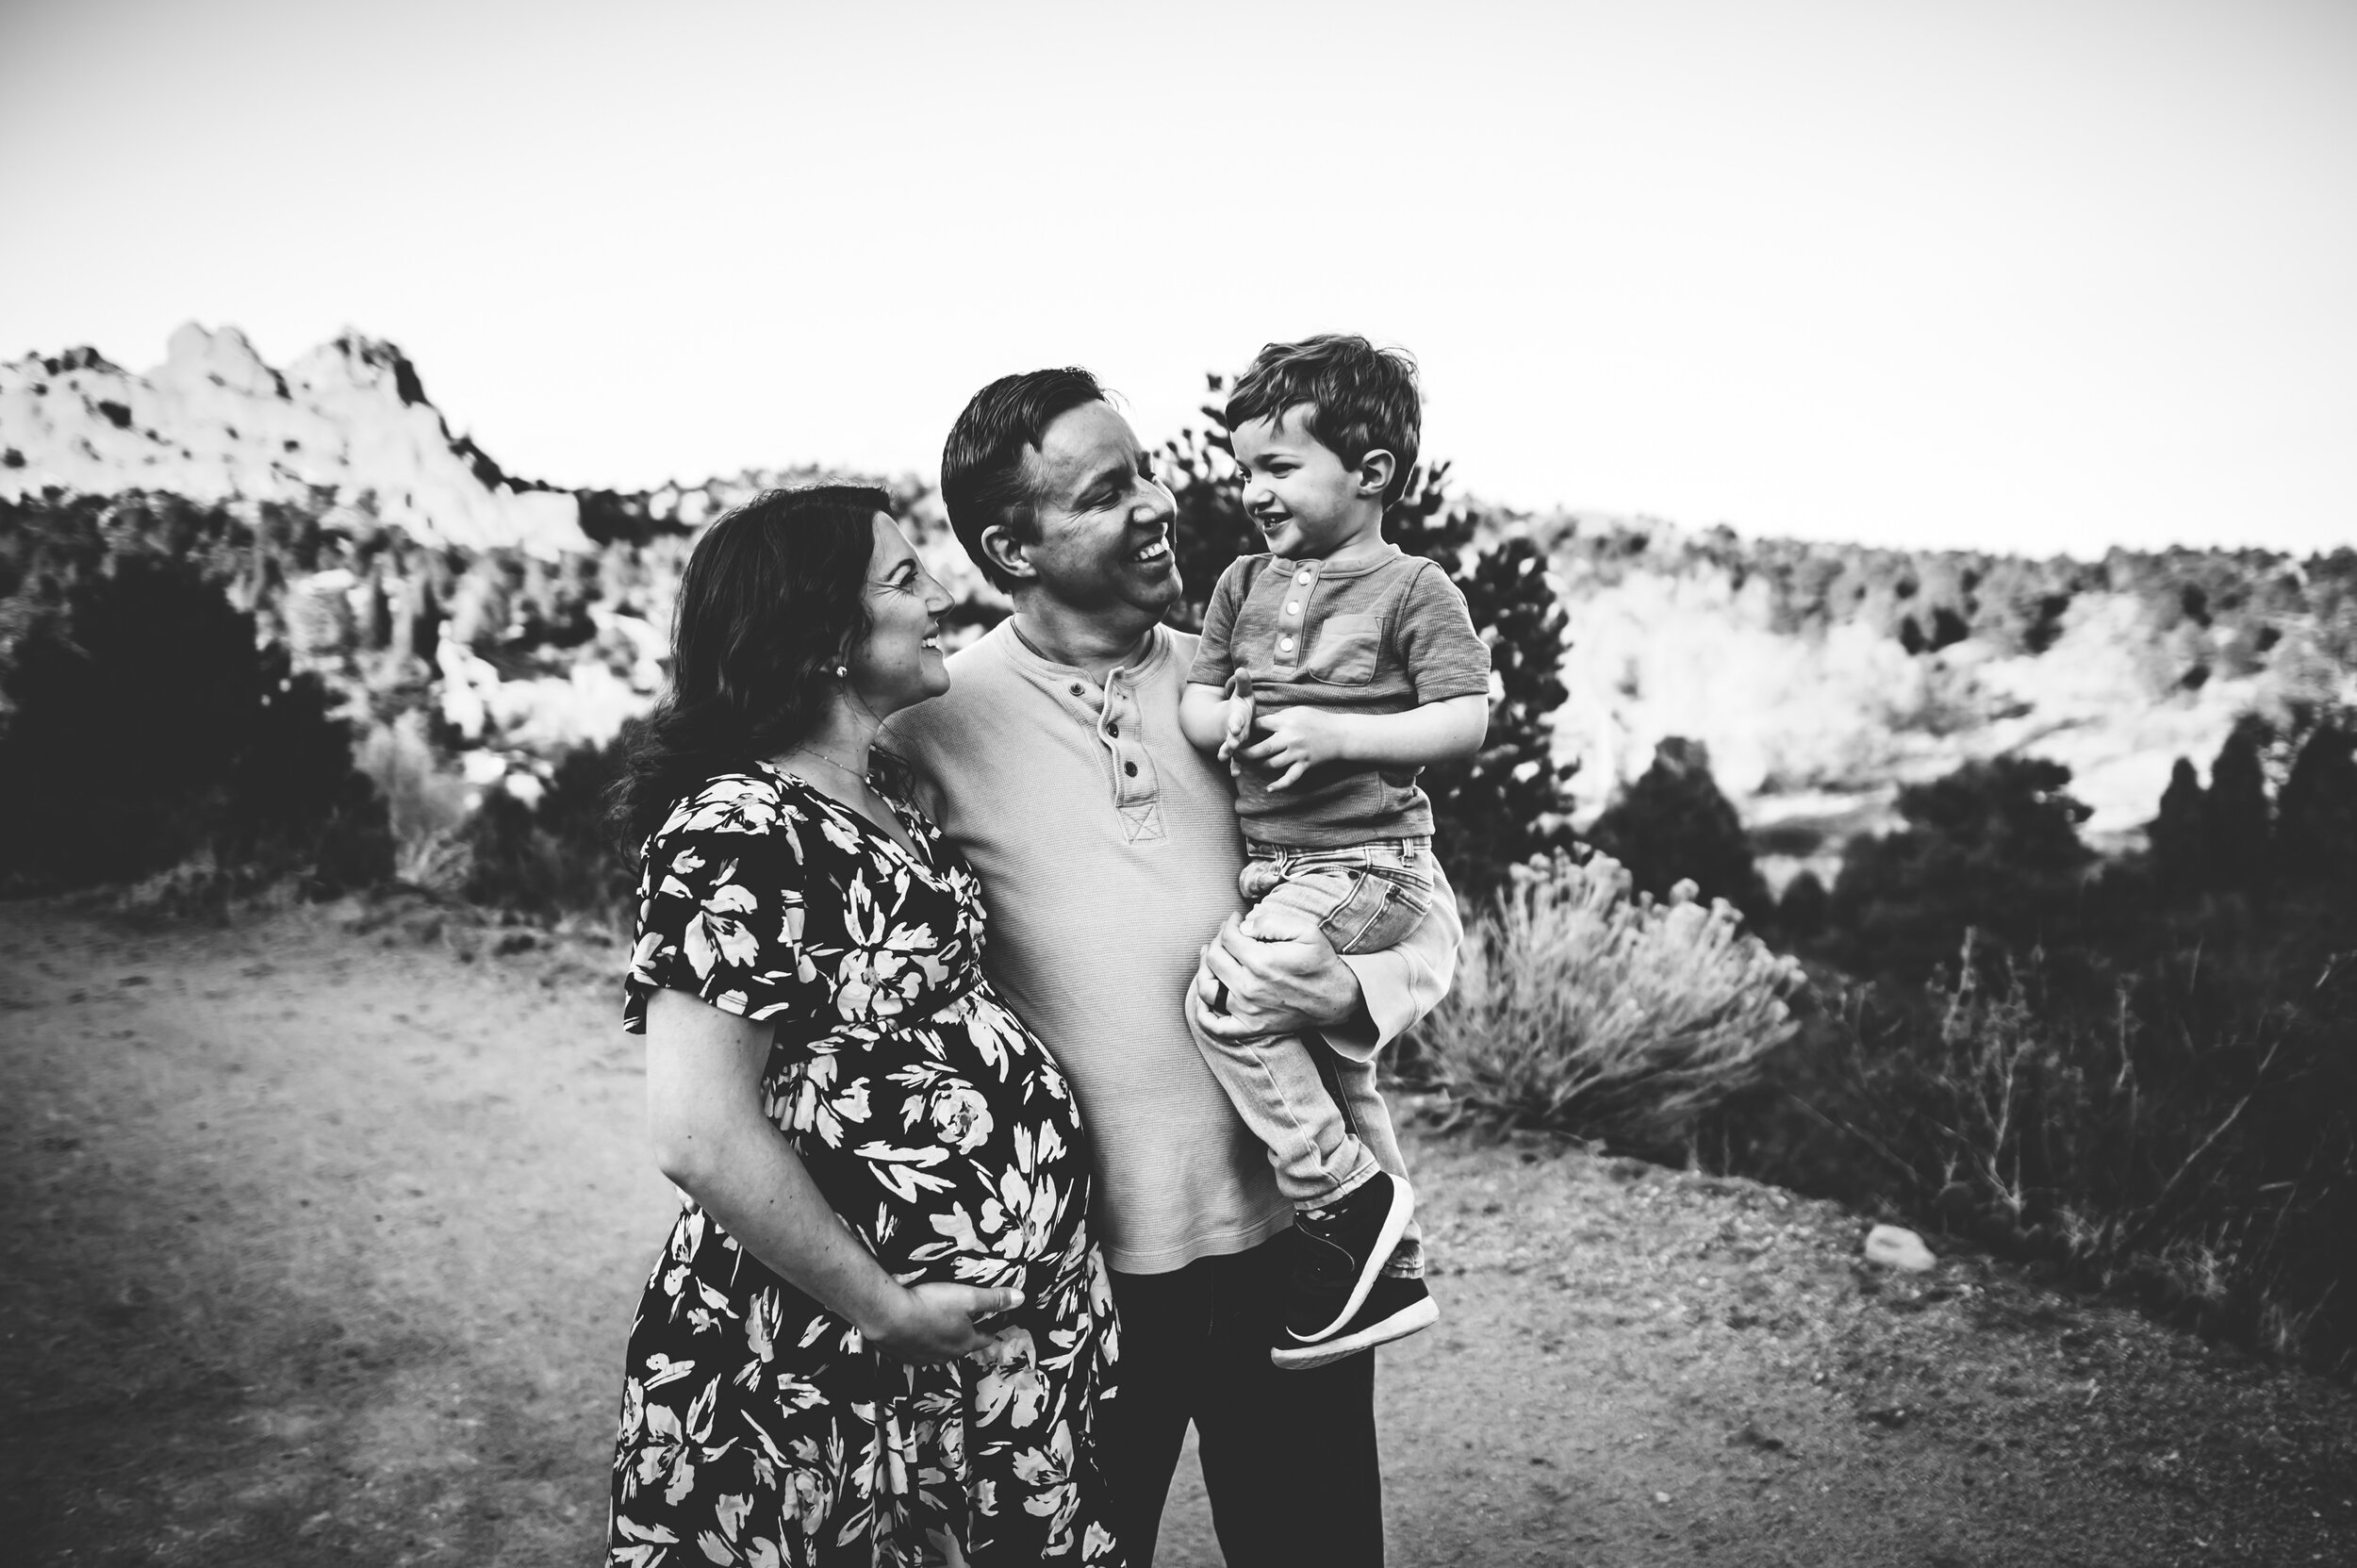 Andrea Grimm Maternity Family Session Colorado Springs Sunset Garden of the Gods Wild Prairie Photography-9-2020.jpg